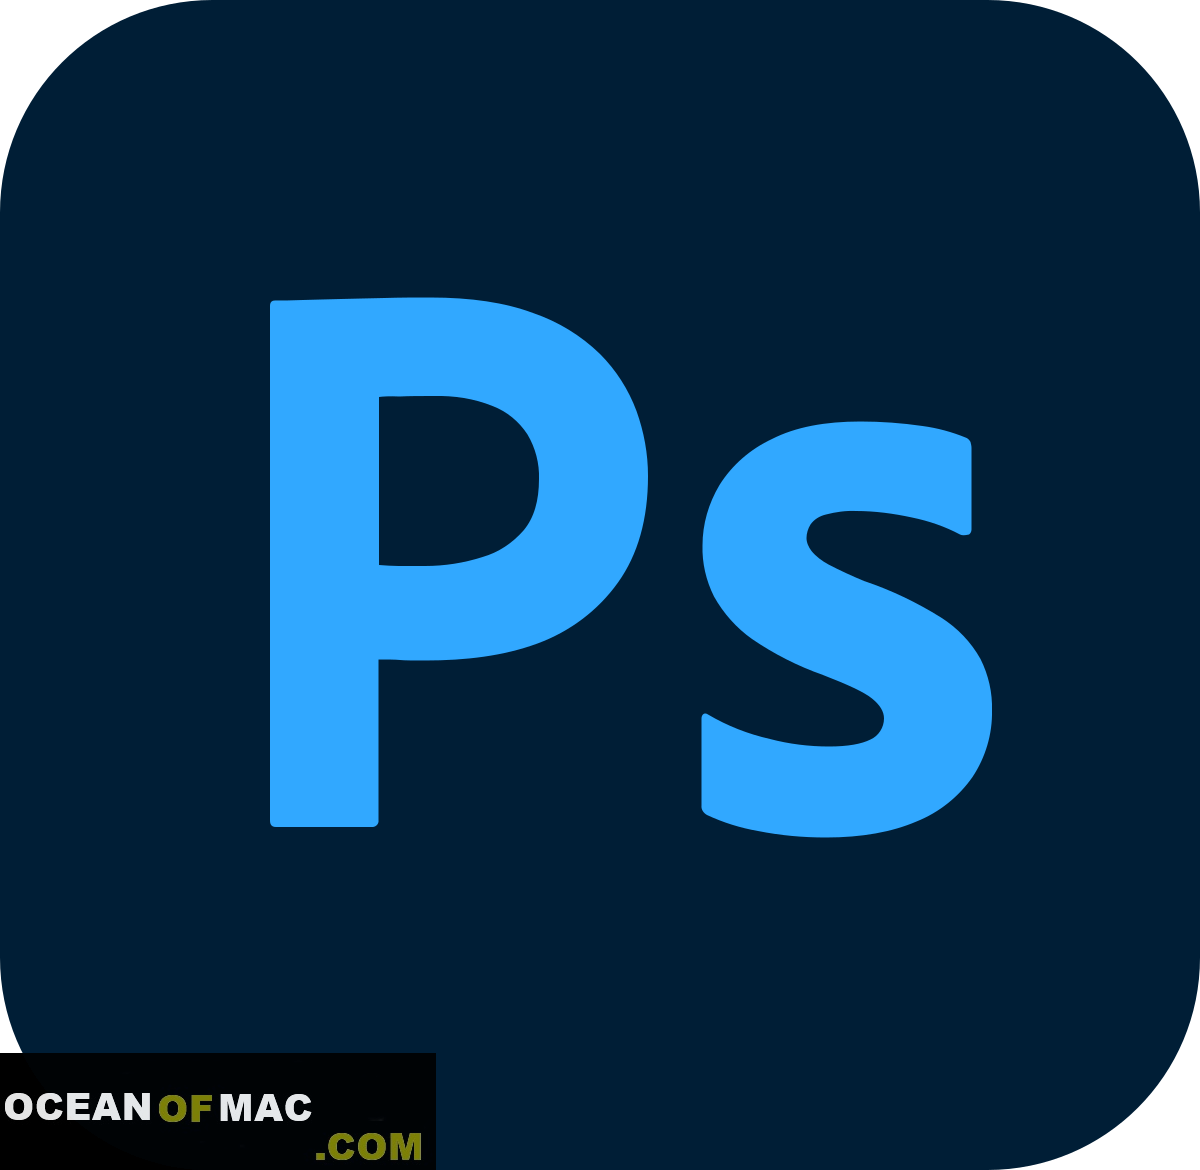 Download Adobe Photoshop 2022 for Mac